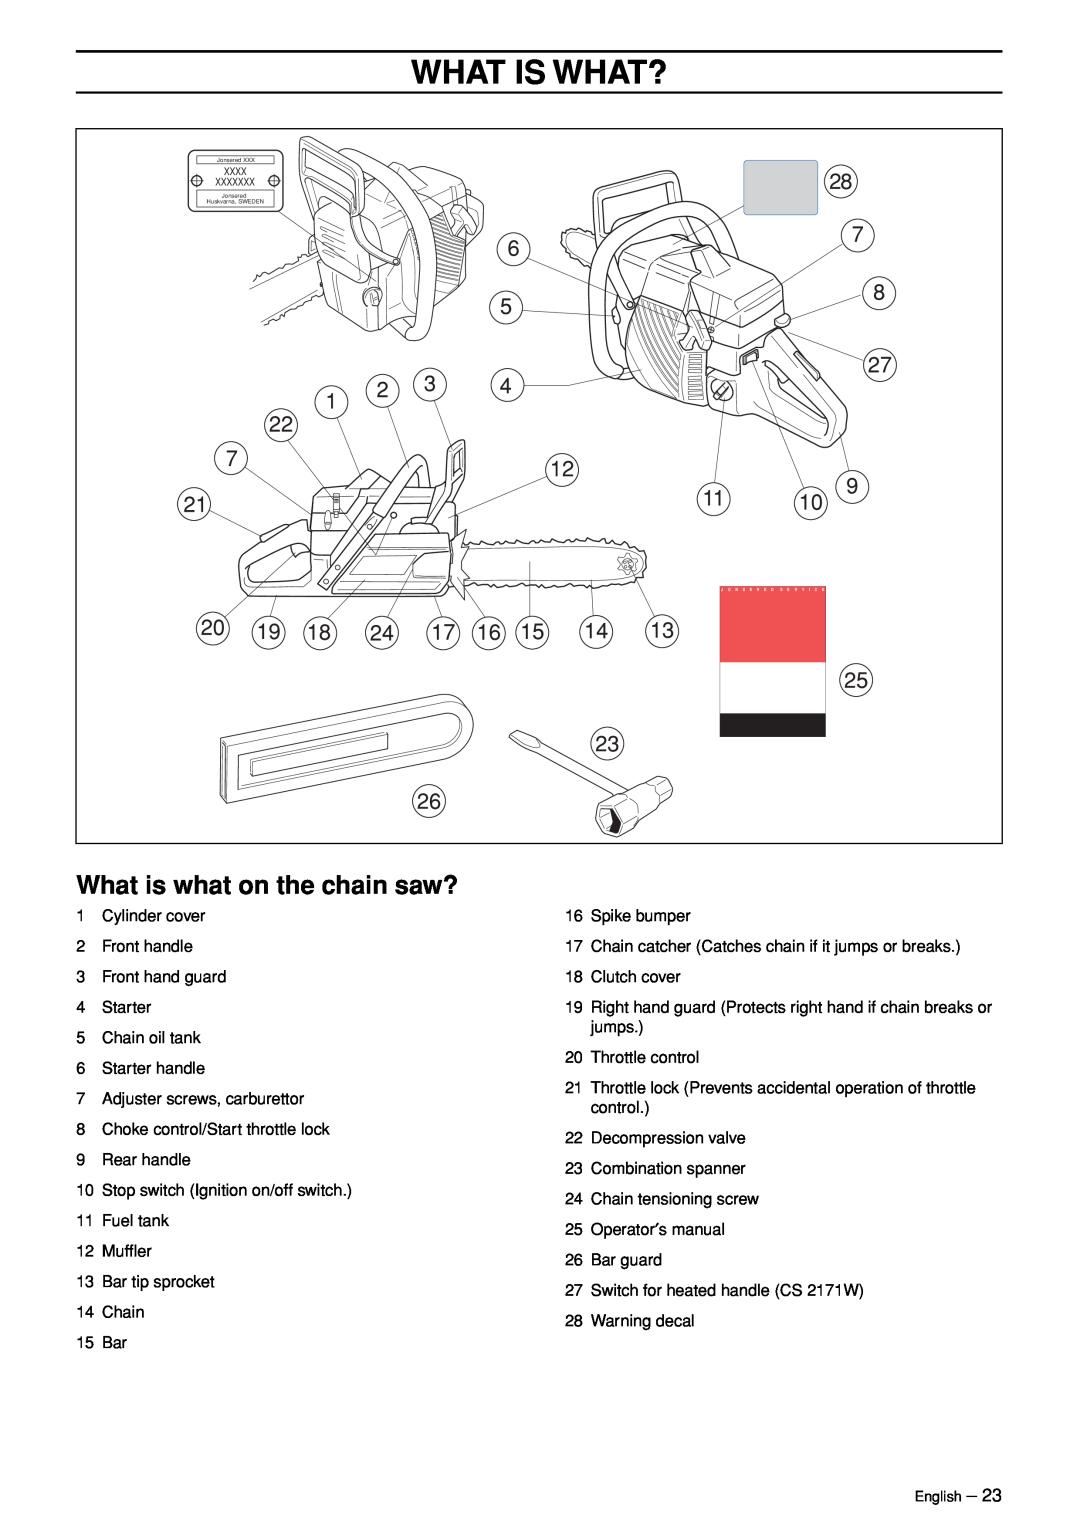 Jonsered CS 2171WH manual What Is What?, What is what on the chain saw? 